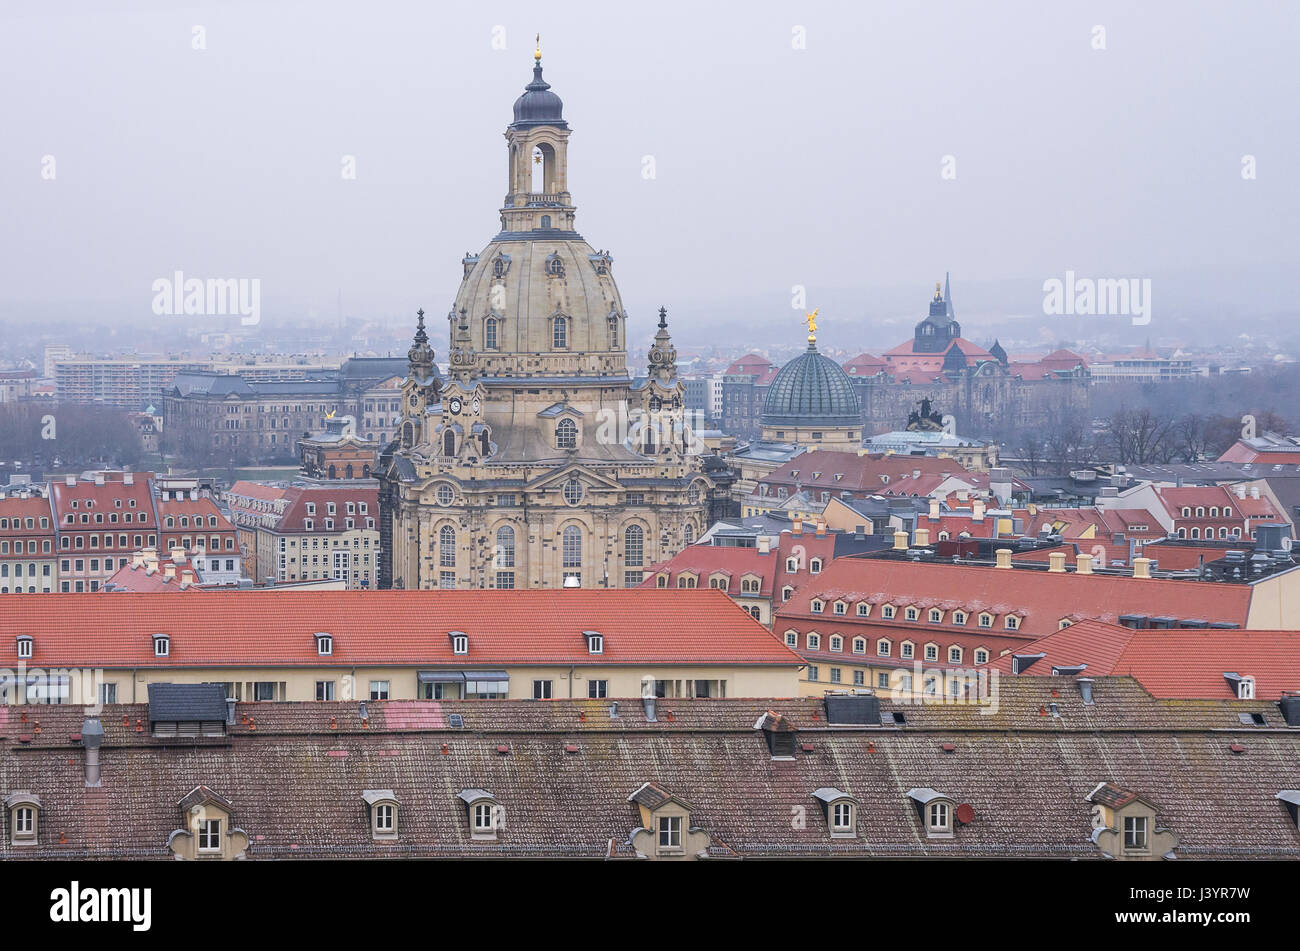 View of the Frauenkirche Church in the city of Dresden, Saxony, Germany, as seen as from the Kreuzkirche Church. Stock Photo